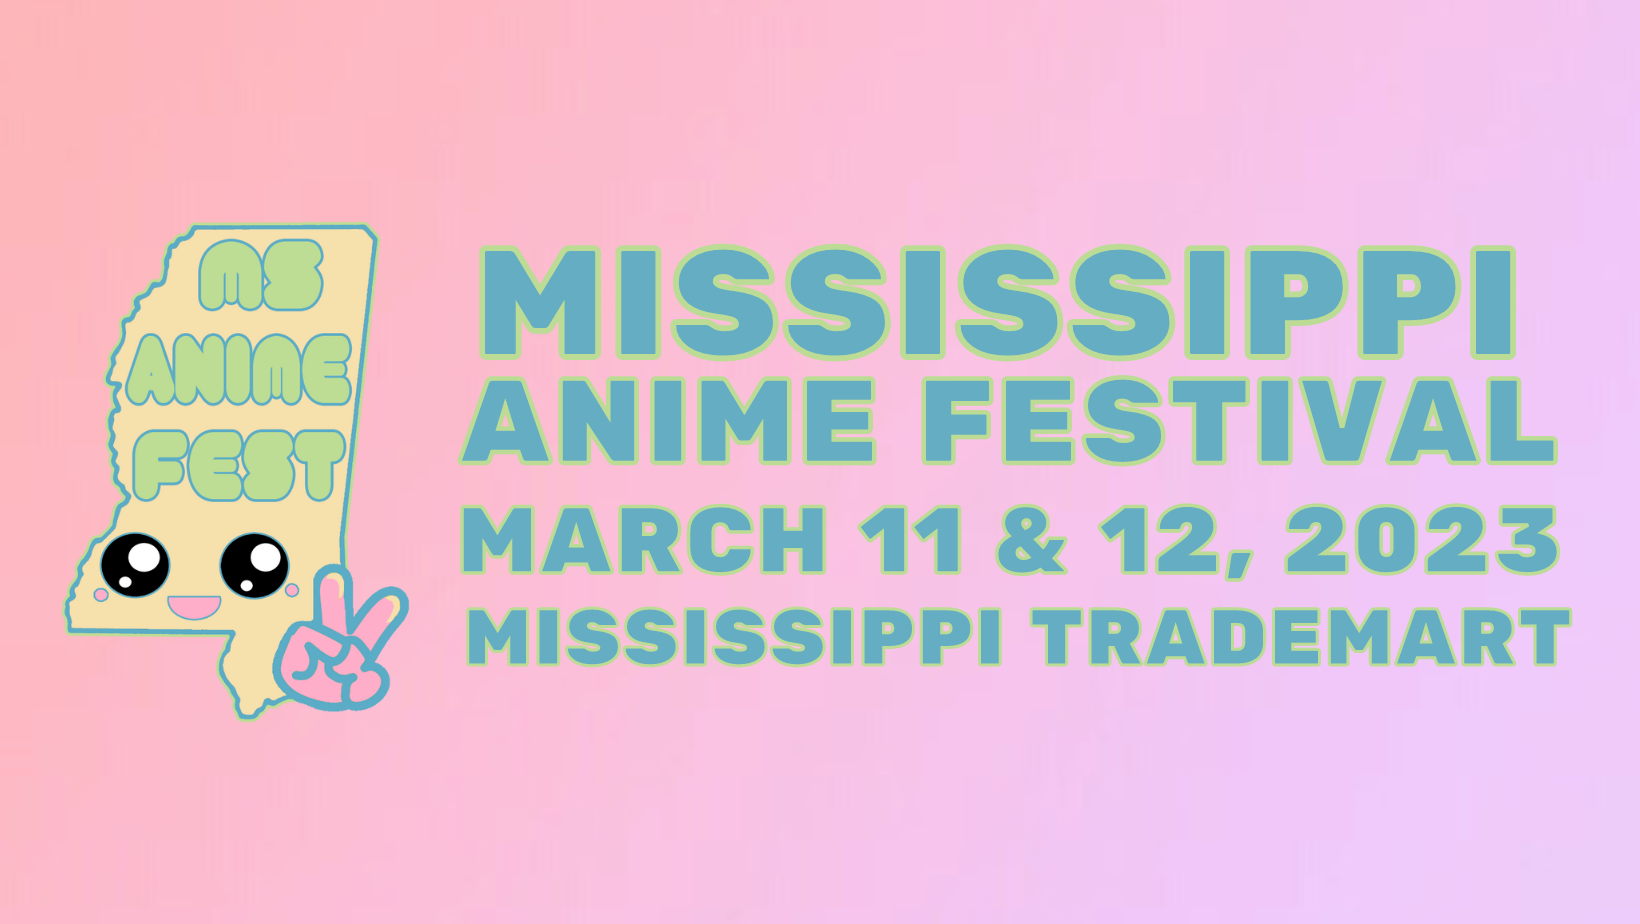 Mississippi Anime Fest 2023 Tickets at Mississippi Trade Mart in